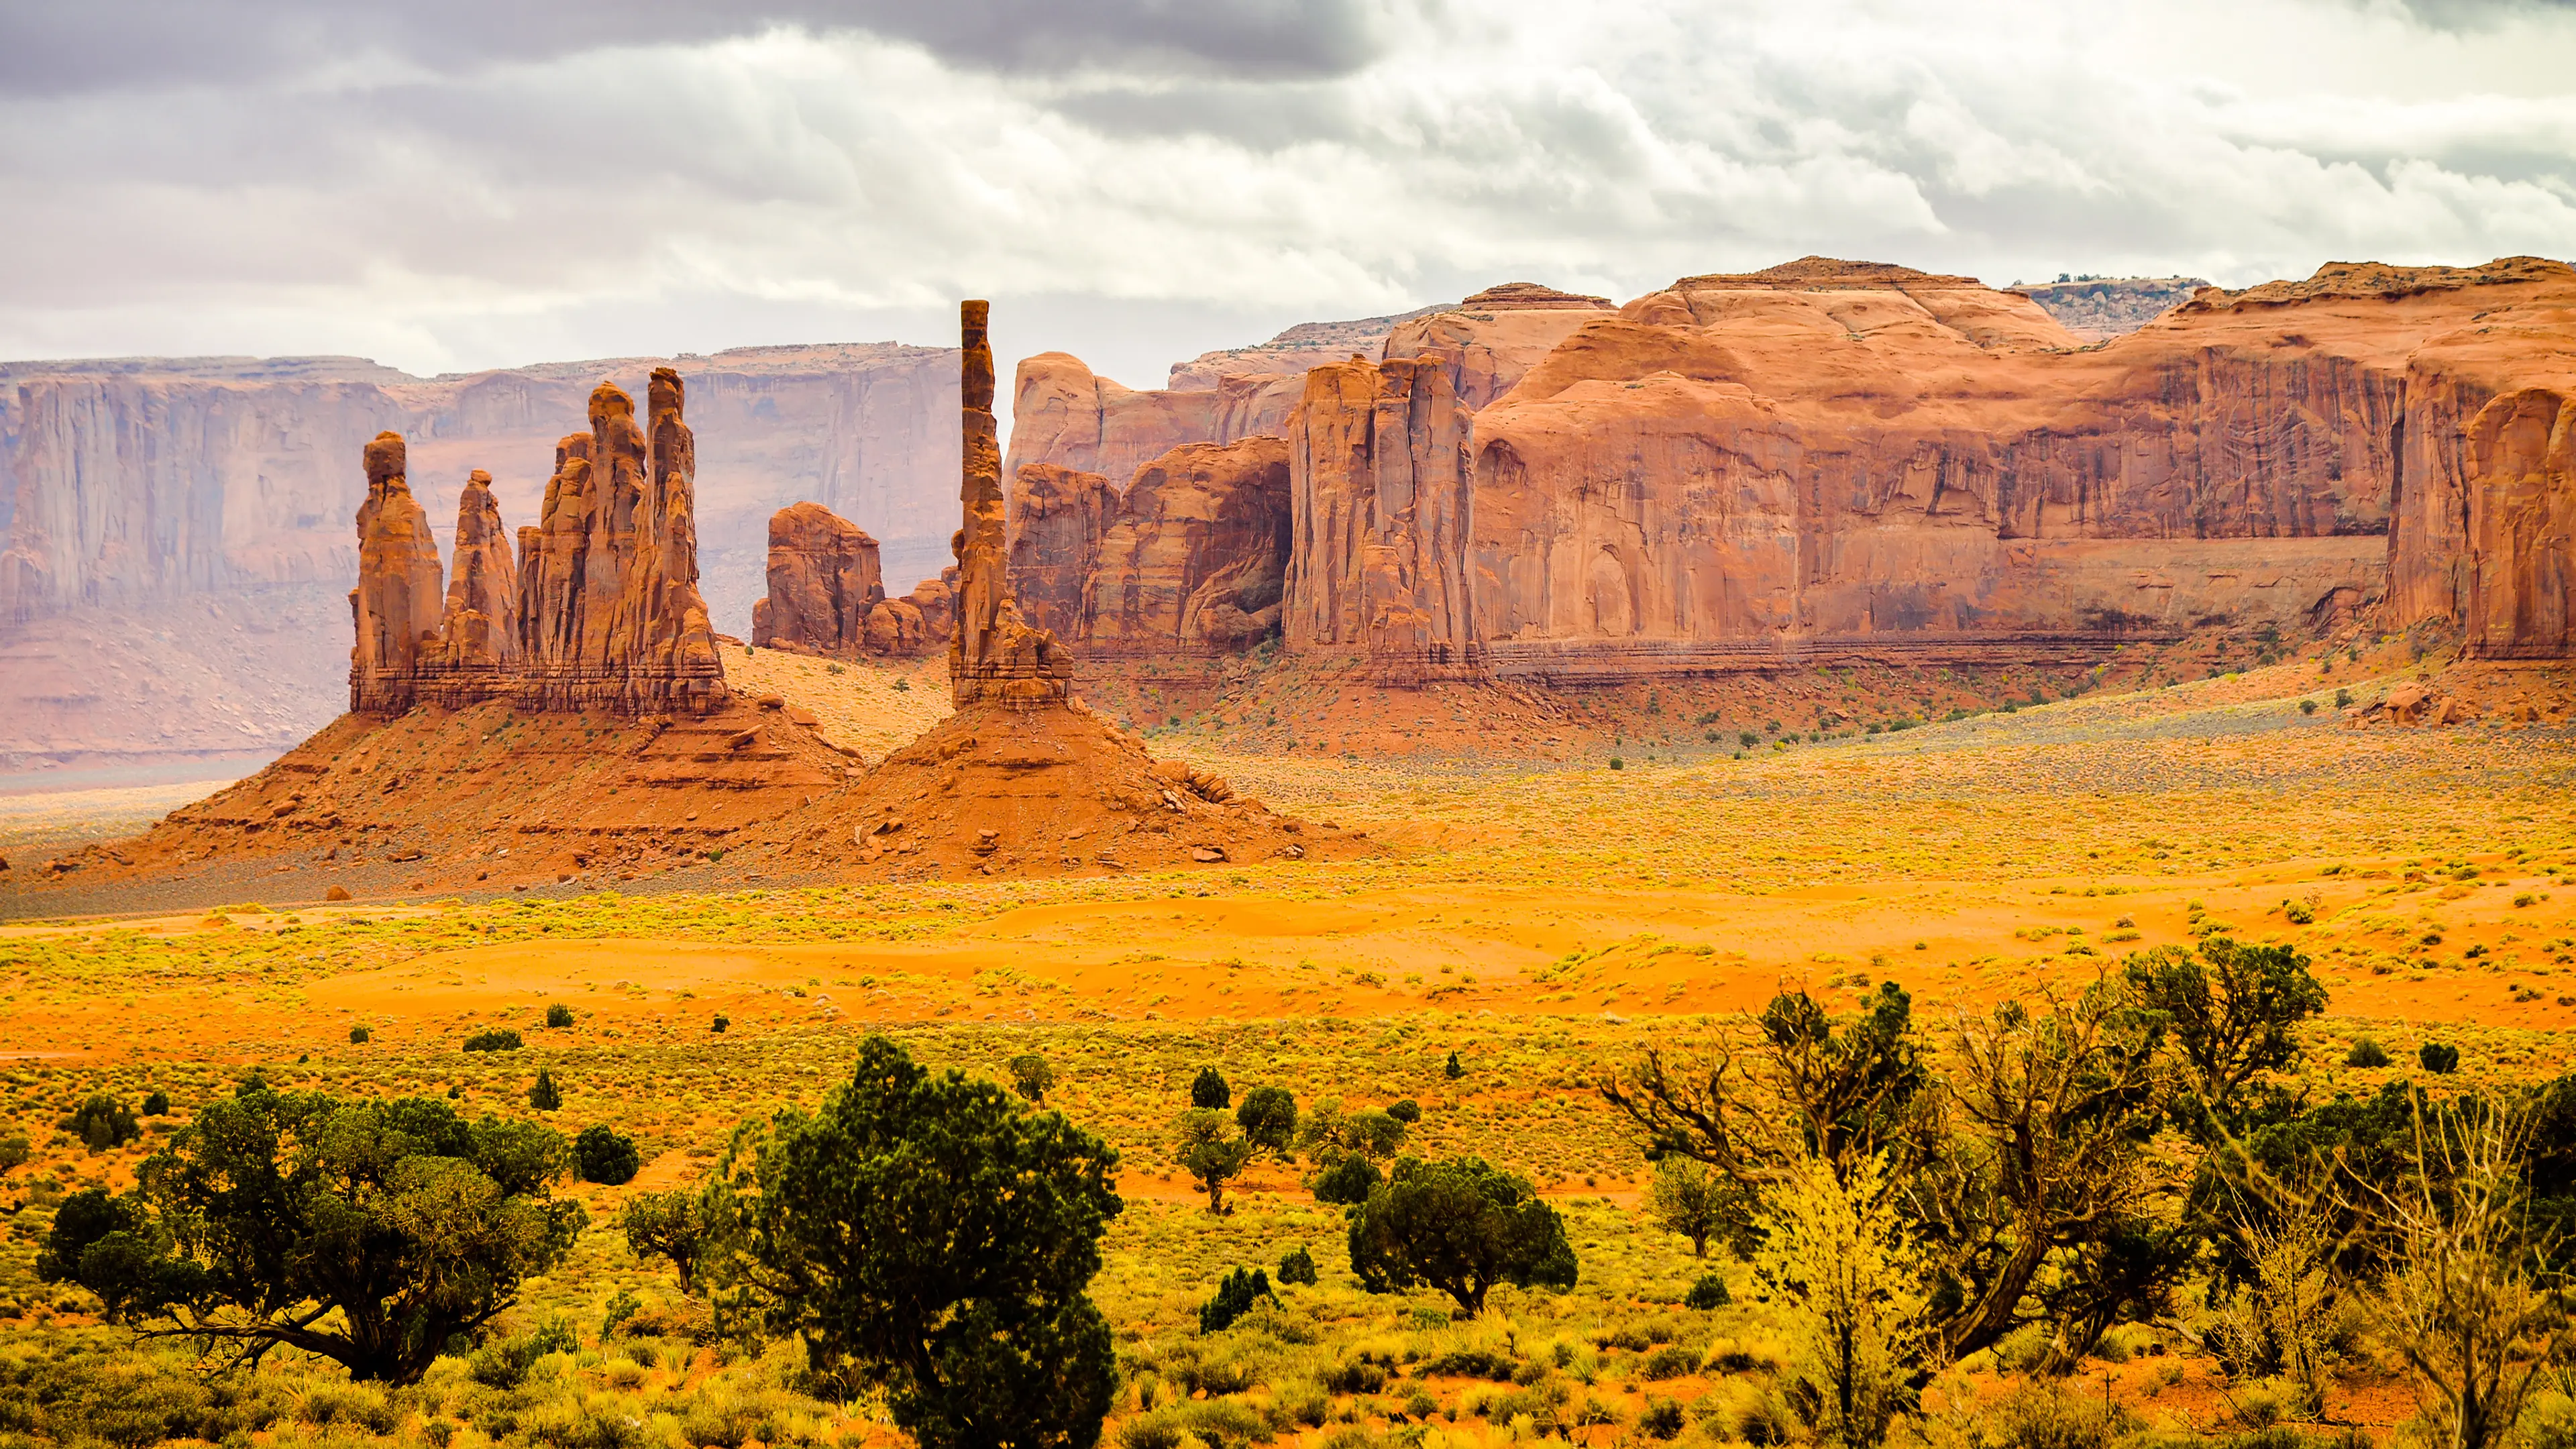 1-Day Tour Guide to Monument Valley Navajo Tribal Park, Arizona